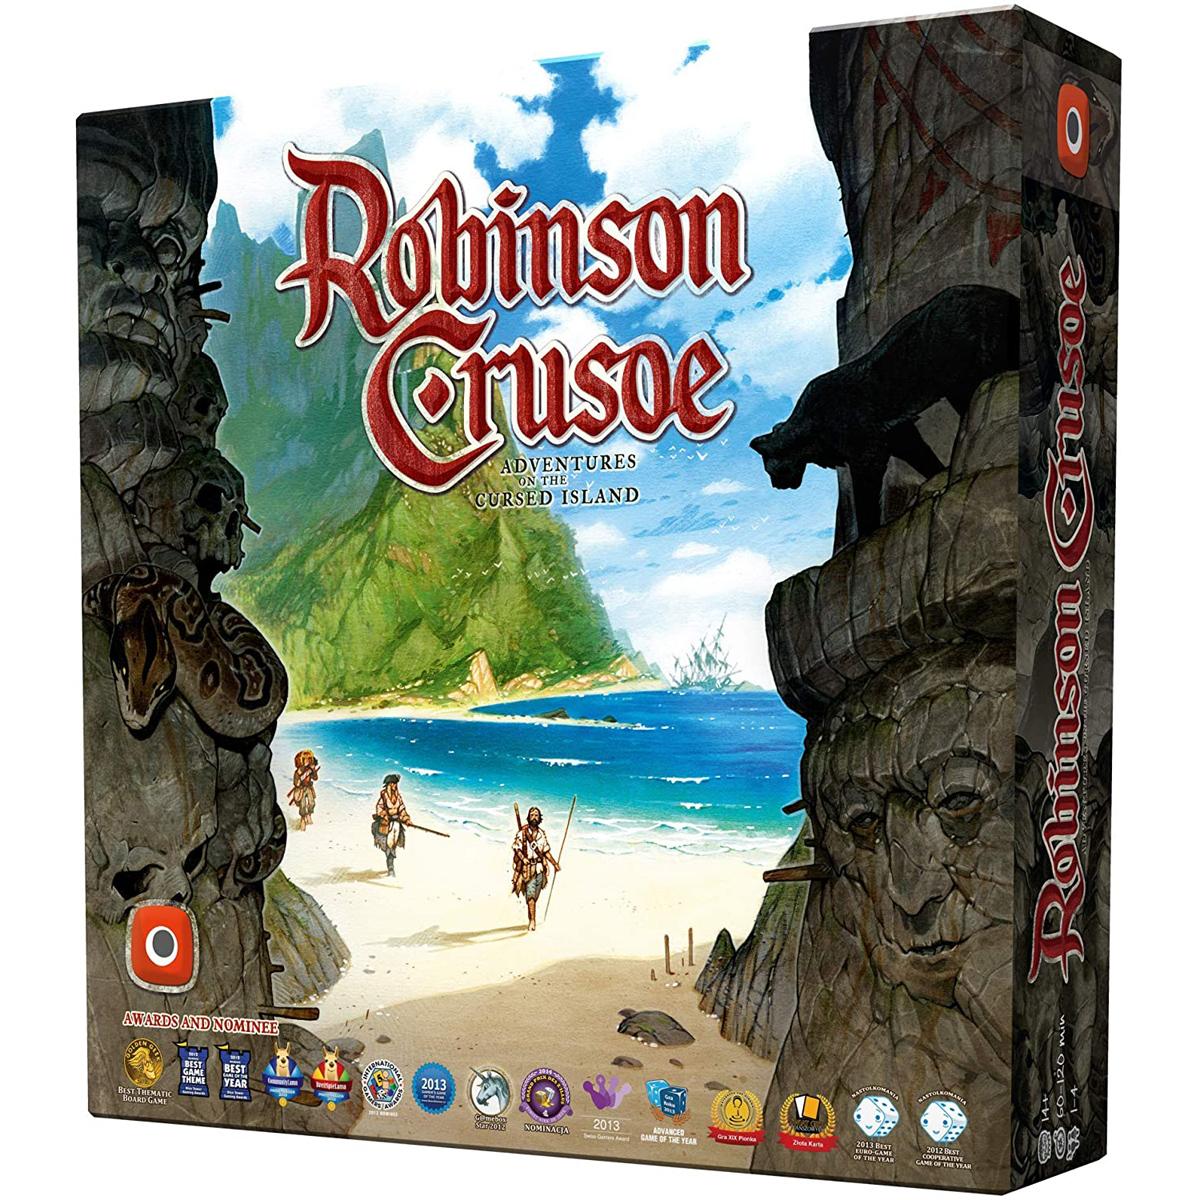 Robinson Crusoe Adventures on the Cursed Island Board Game for $37.98 Shipped